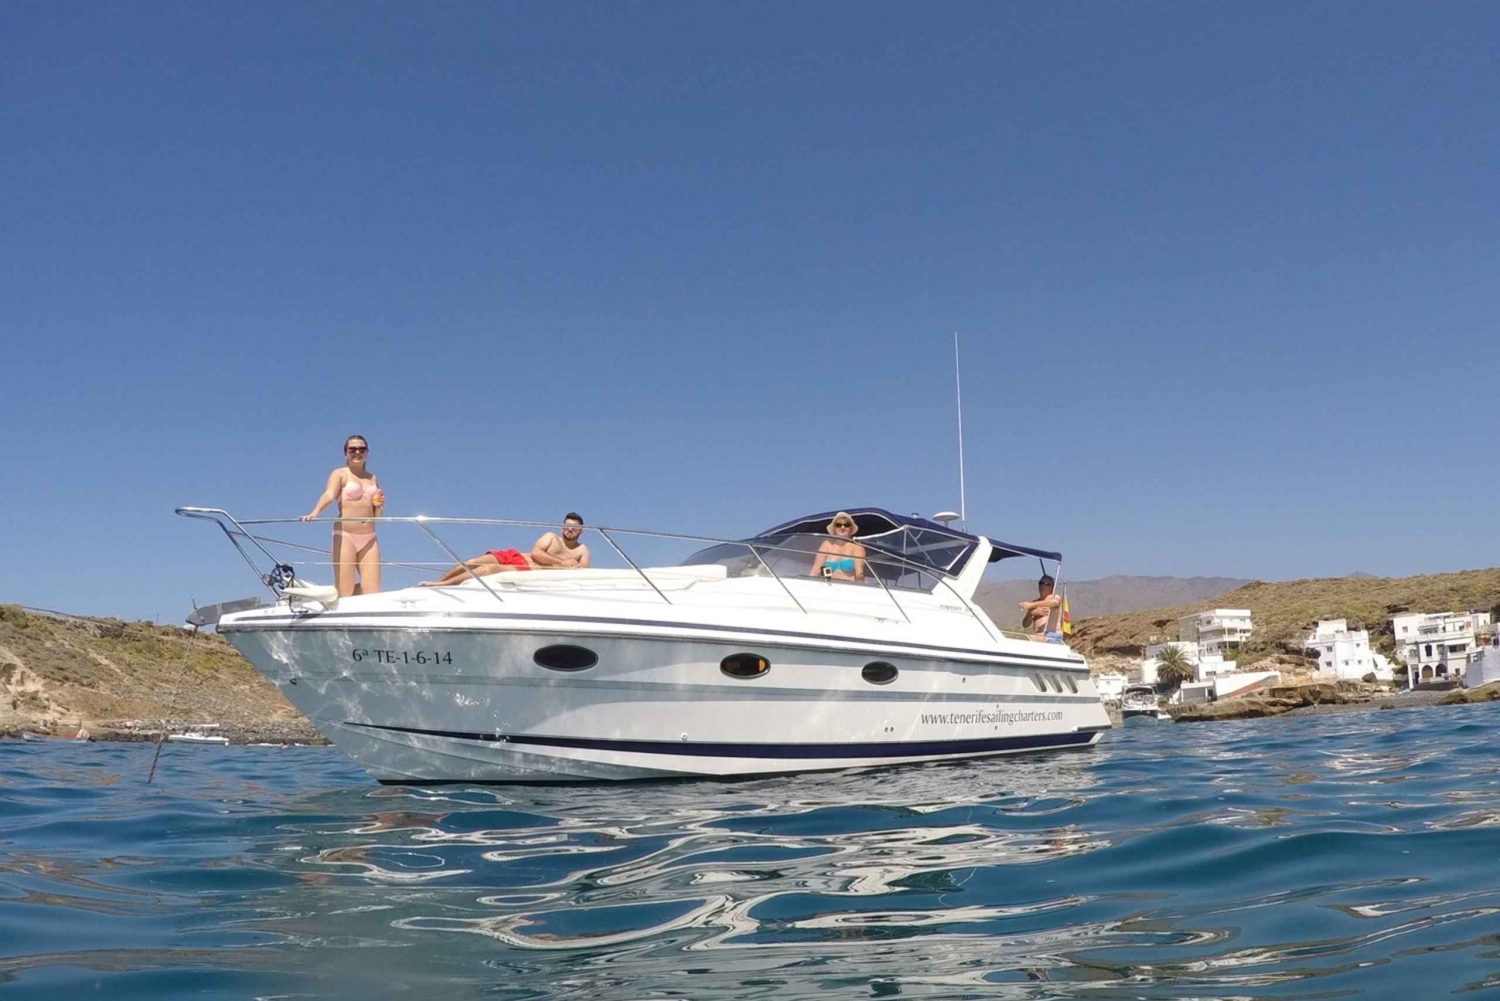 Best boat excursions in Tenerife